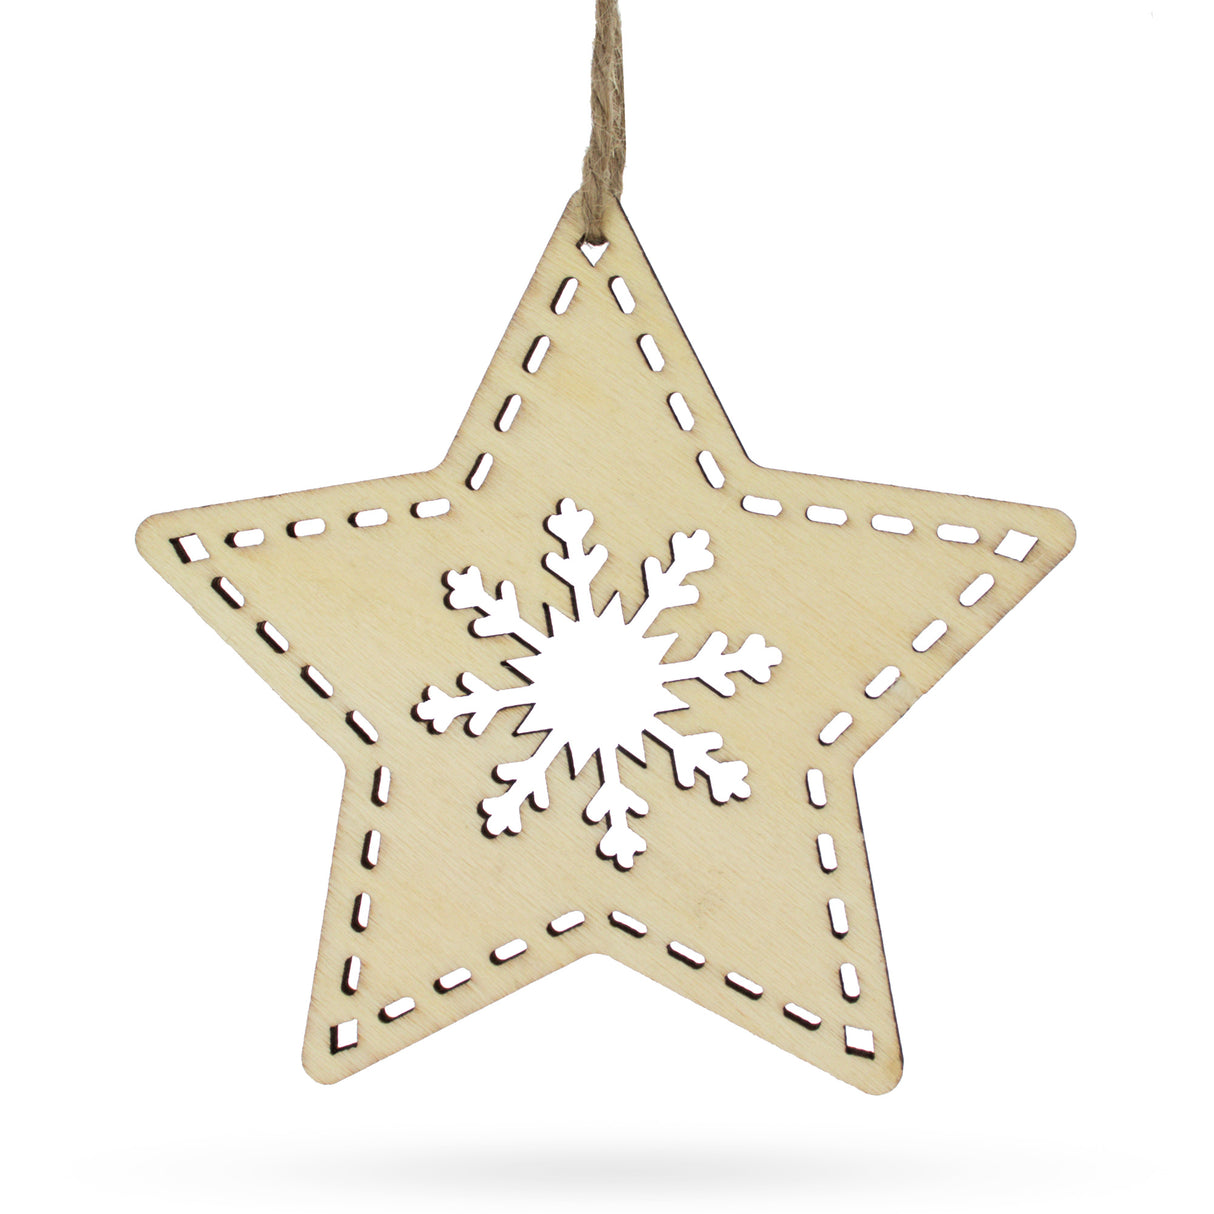 Unfinished Wooden Star Ornament with Snowflake DIY Craft 4 Inches in Beige color, Star shape